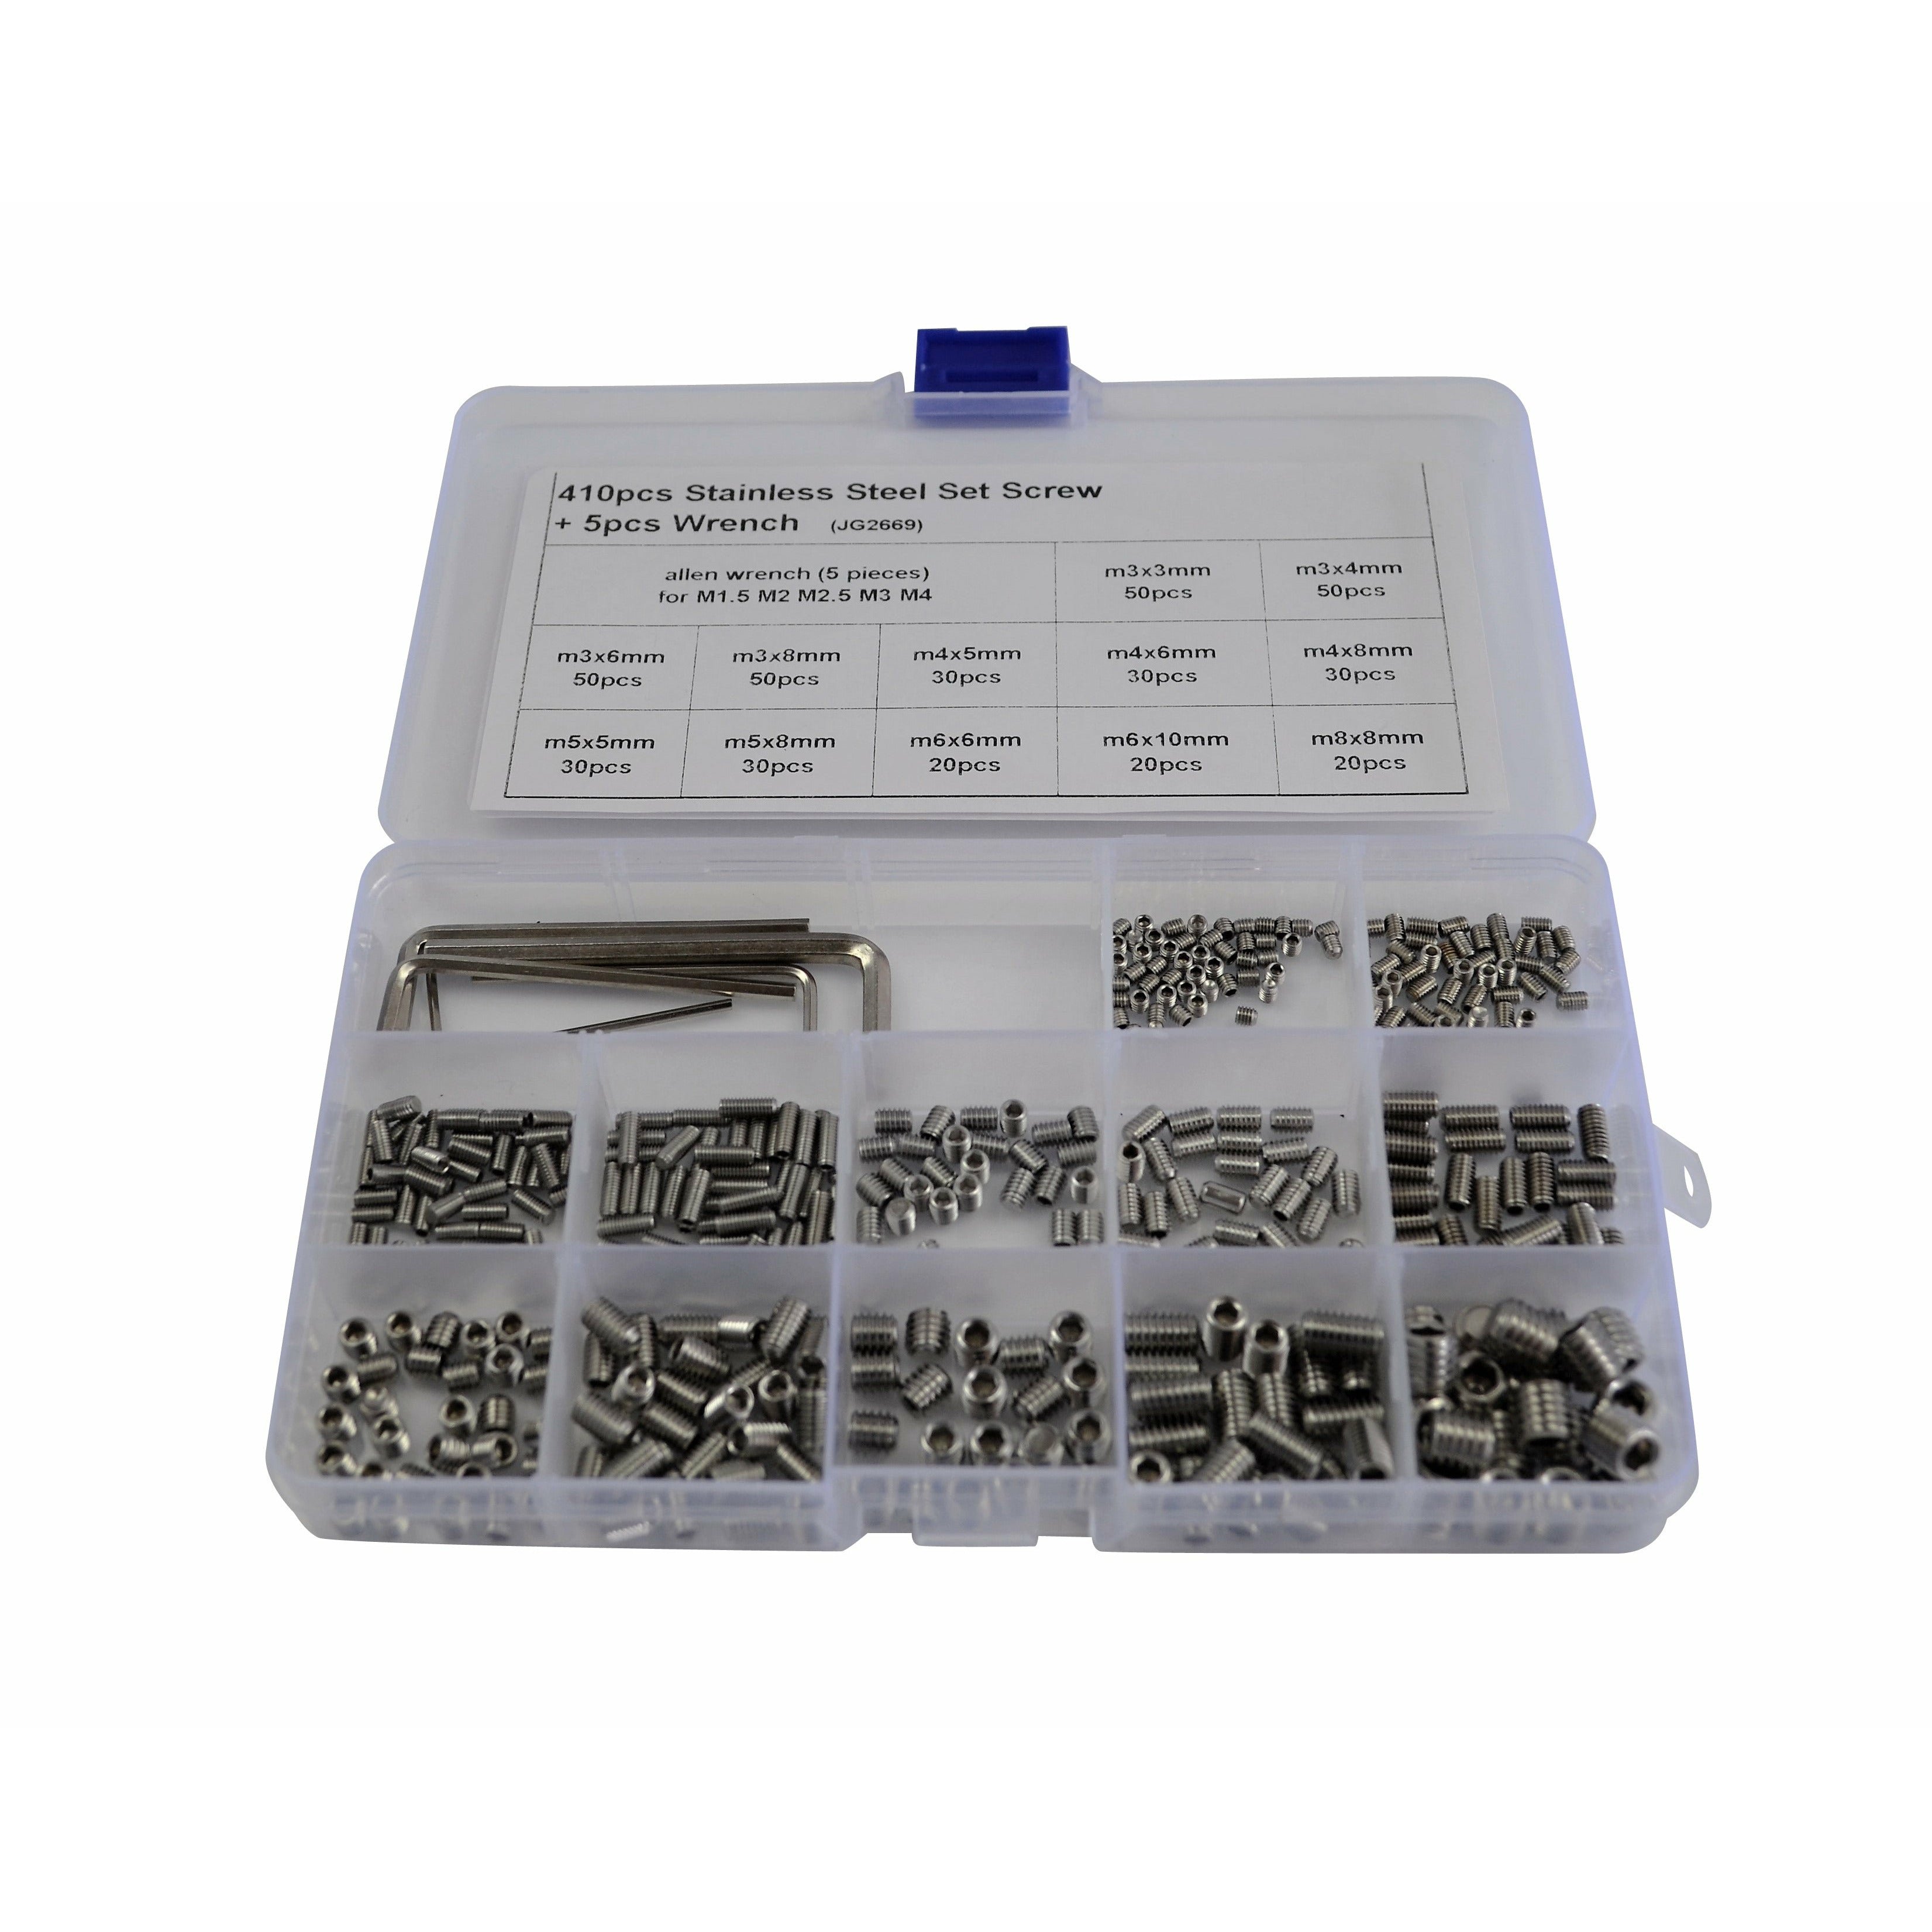 820pc Metric and Imperial Stainless Steel Grub Screw Grab Kit